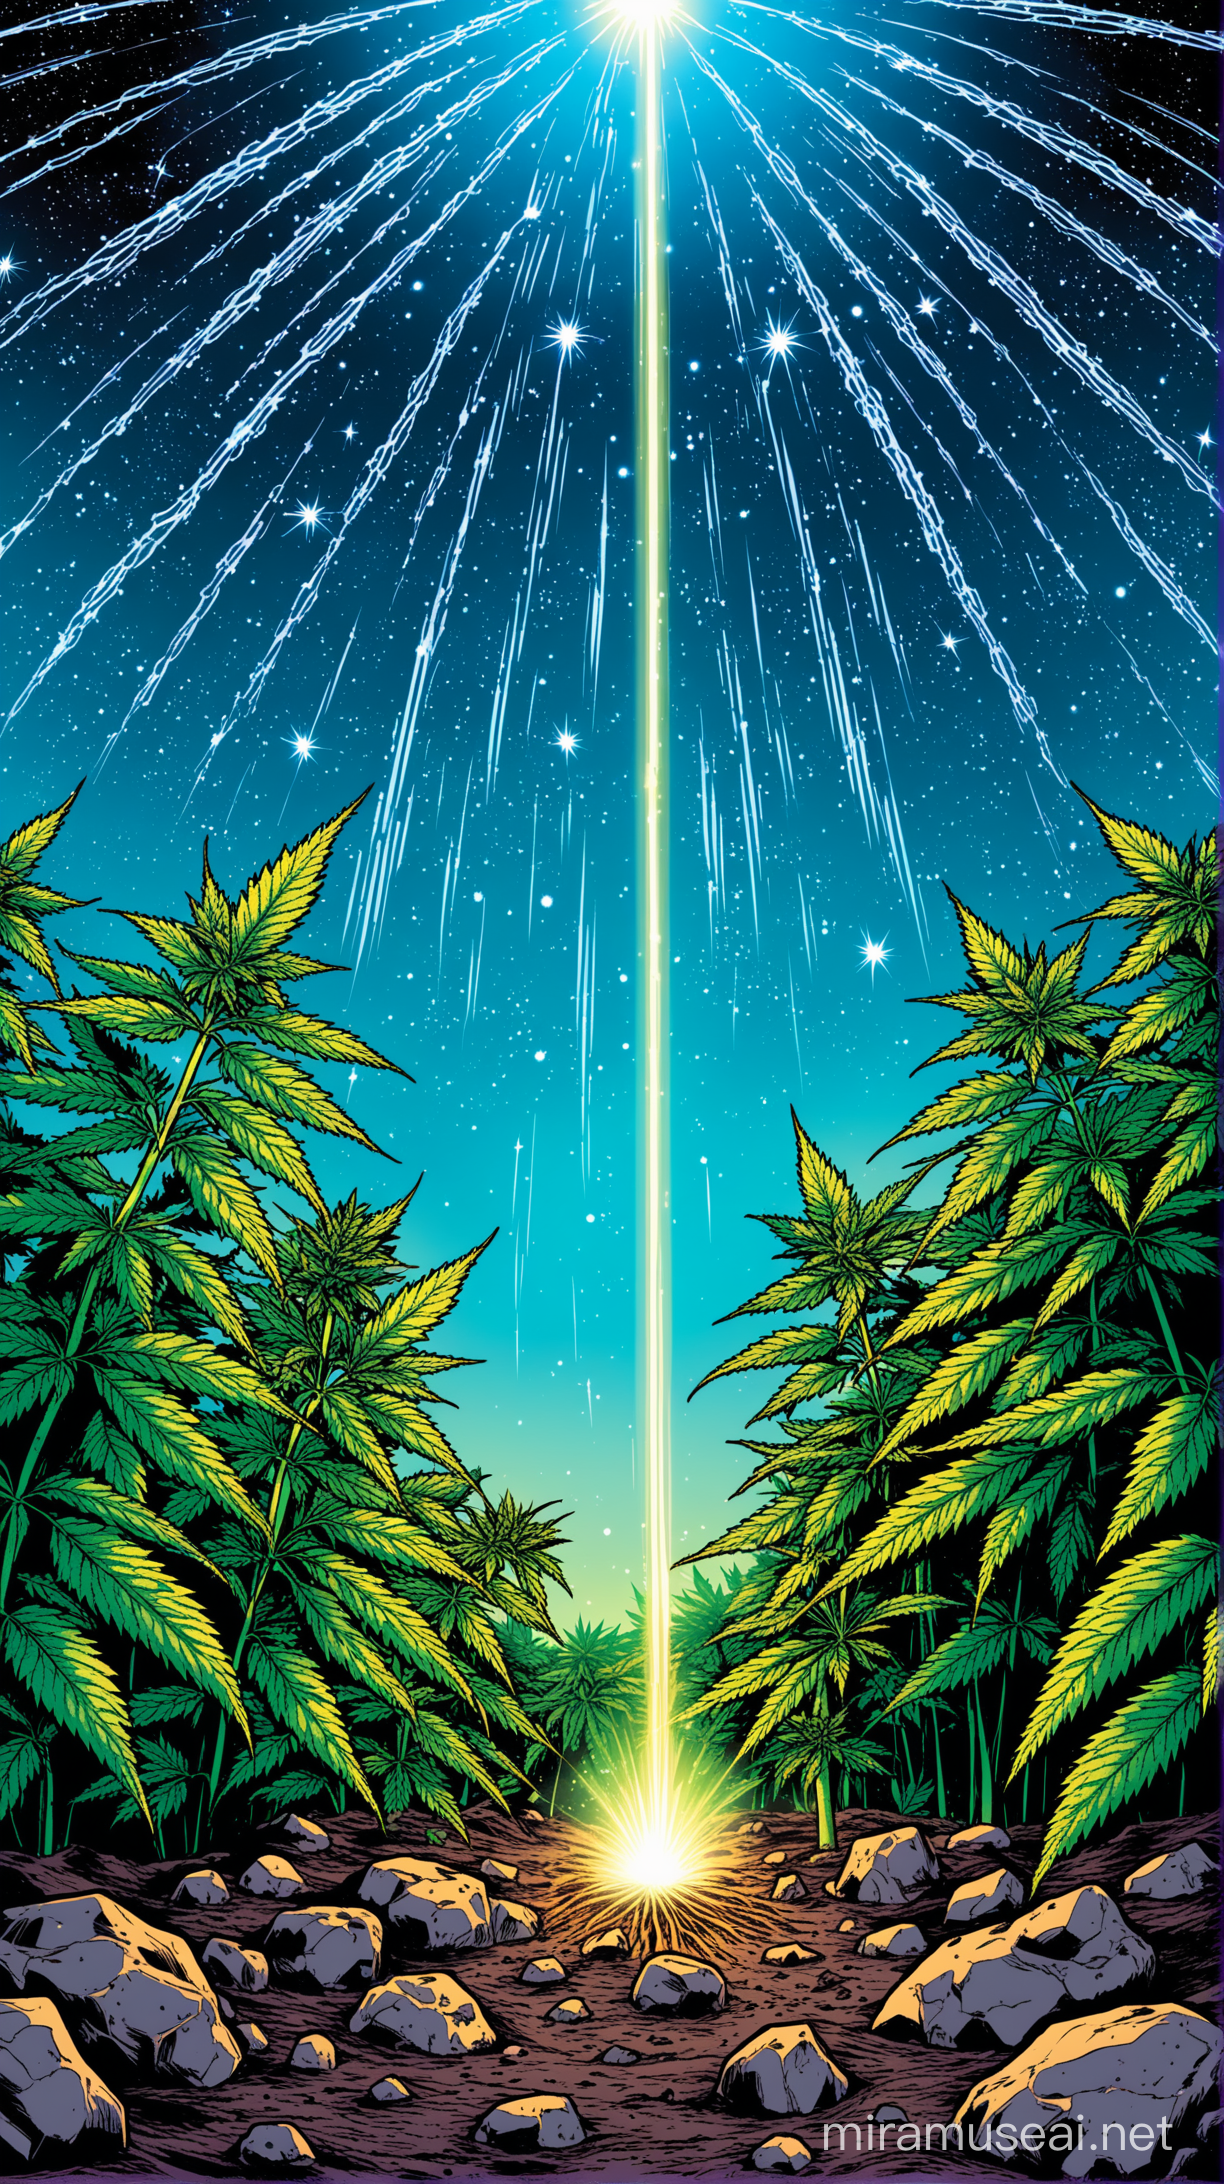 Clear blue sky with faintly shower of small meteor rock has fallen onto a marijuana patch on the ground it has effected the marijuana plants making the roots and veins  of the plant batch is illuminated with cosmic energy comic book style art 